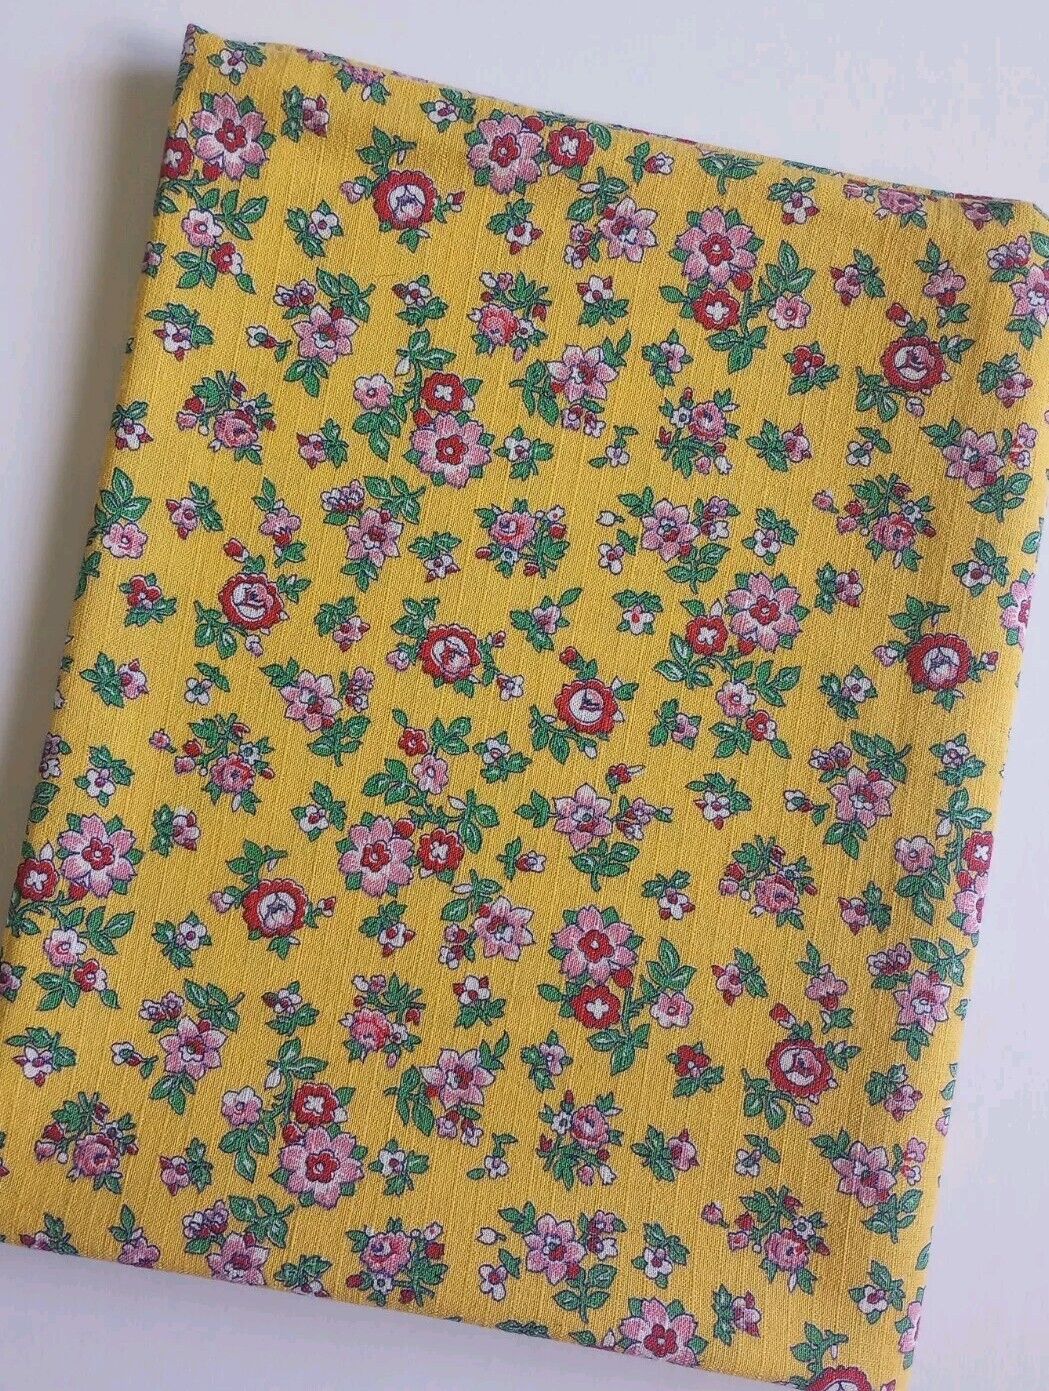 Vintage Full Feedsack Flour Sack Fabric 36x45 Opened Yellow And Flowers